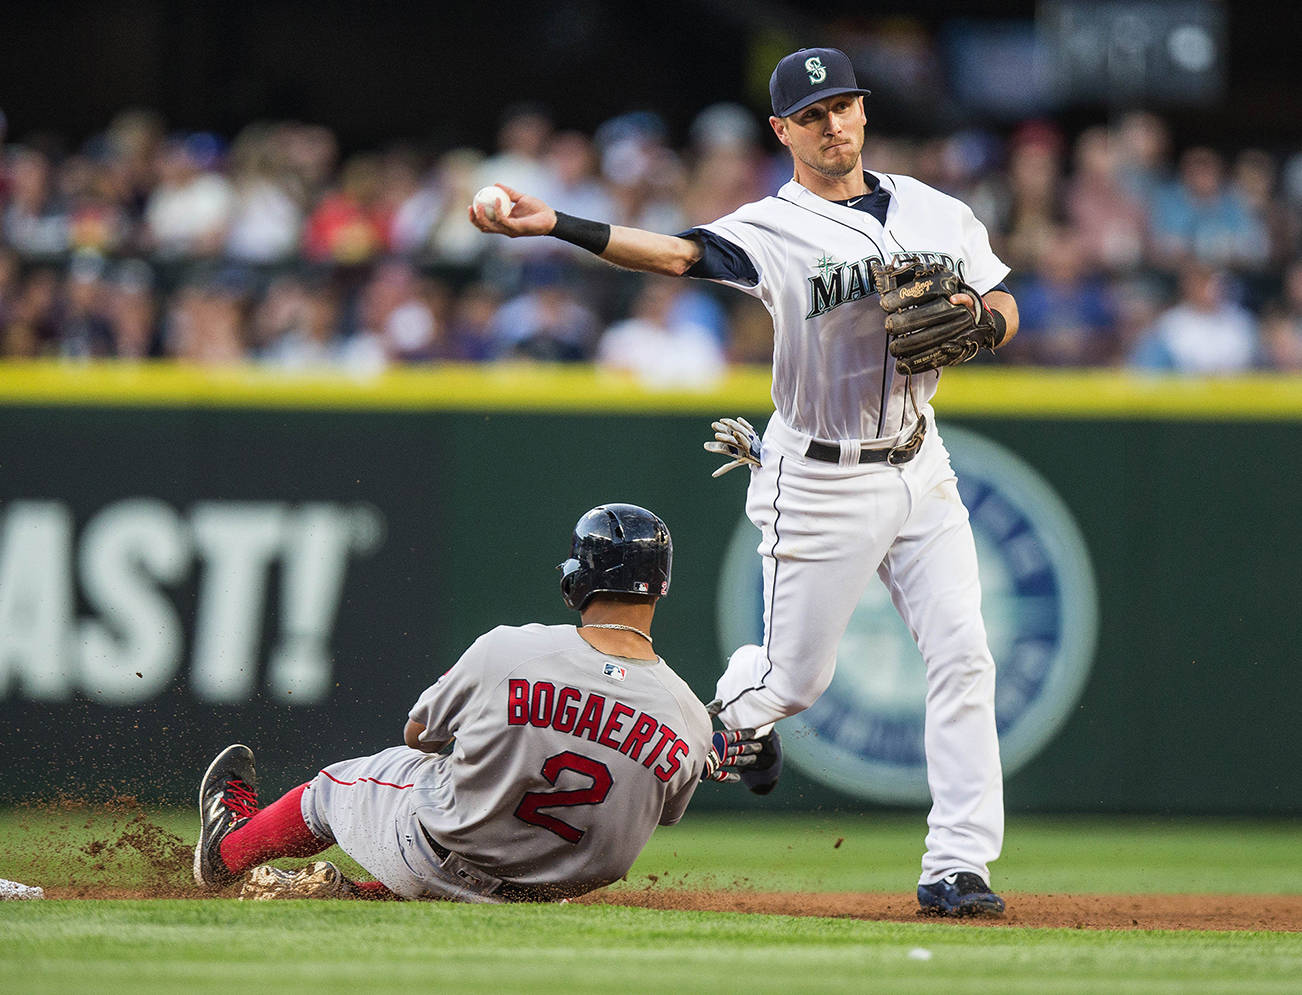 (Dean Rutz | Seattle Times)                                Seattle Mariners infielder Shawn O’Malley turns a double play over the Boston Red Sox’ Xander Bogaerts in the third inning on August 4 at Safeco Field in Seattle. O’Malley and Taylor Motter are in a fight for the team’s utility player spot on the roster this spring.